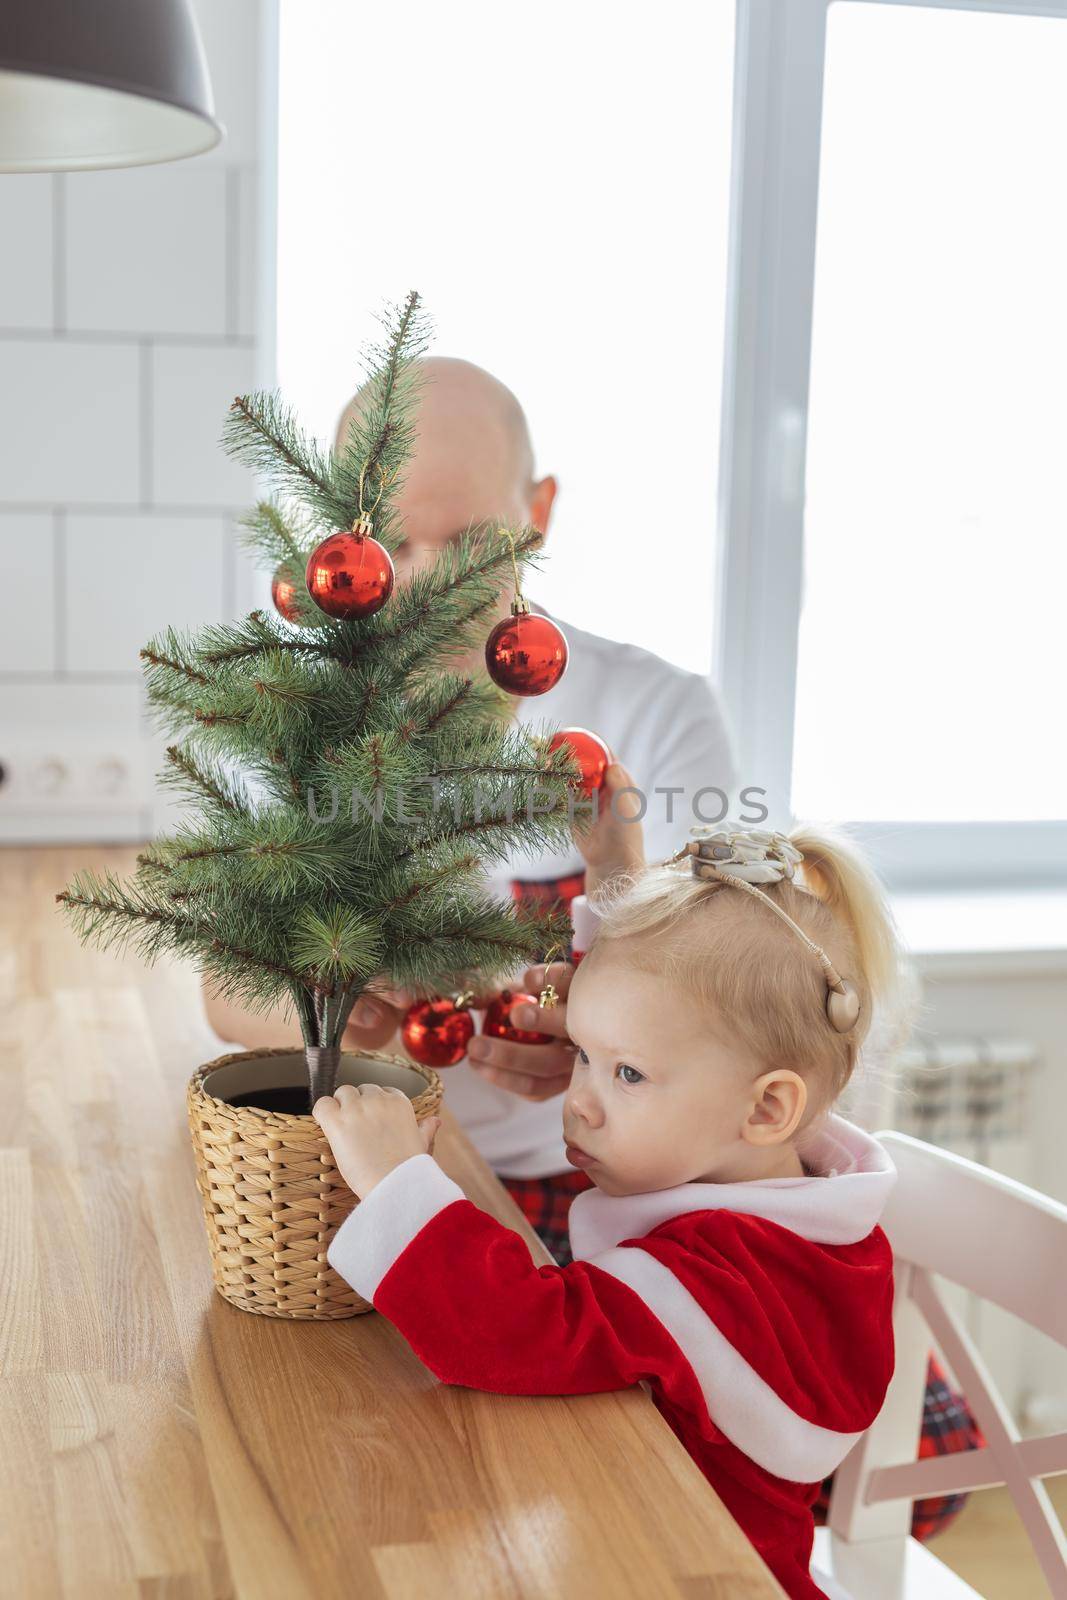 Child with cochlear implant hearing aid having fun with father and small christmas tree - diversity and inclusion and deafness treatment and medical innovative technologies by Satura86